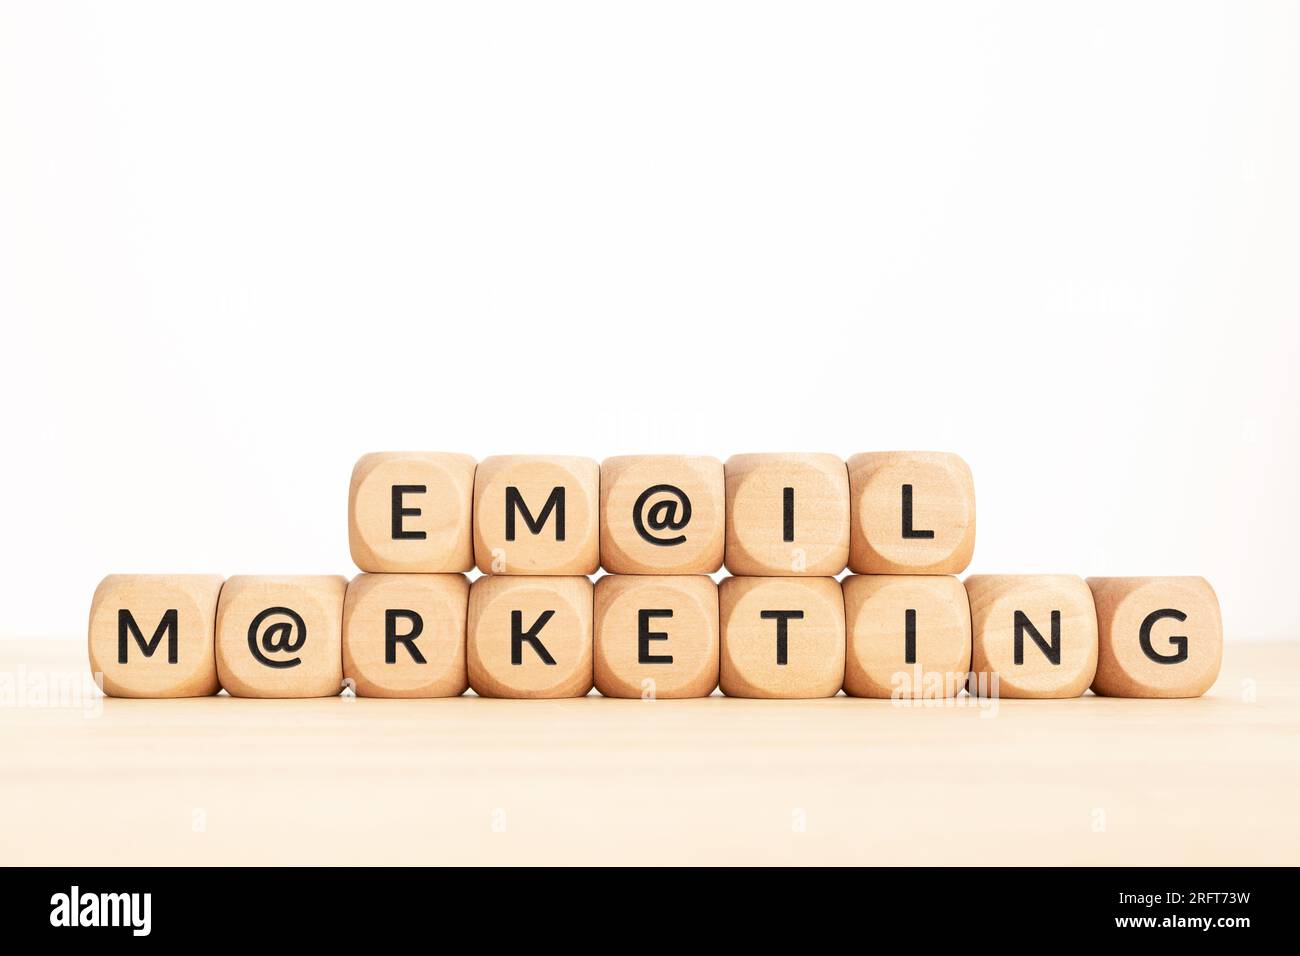 Email Marketing phrase on wooden blocks. Copy space Stock Photo